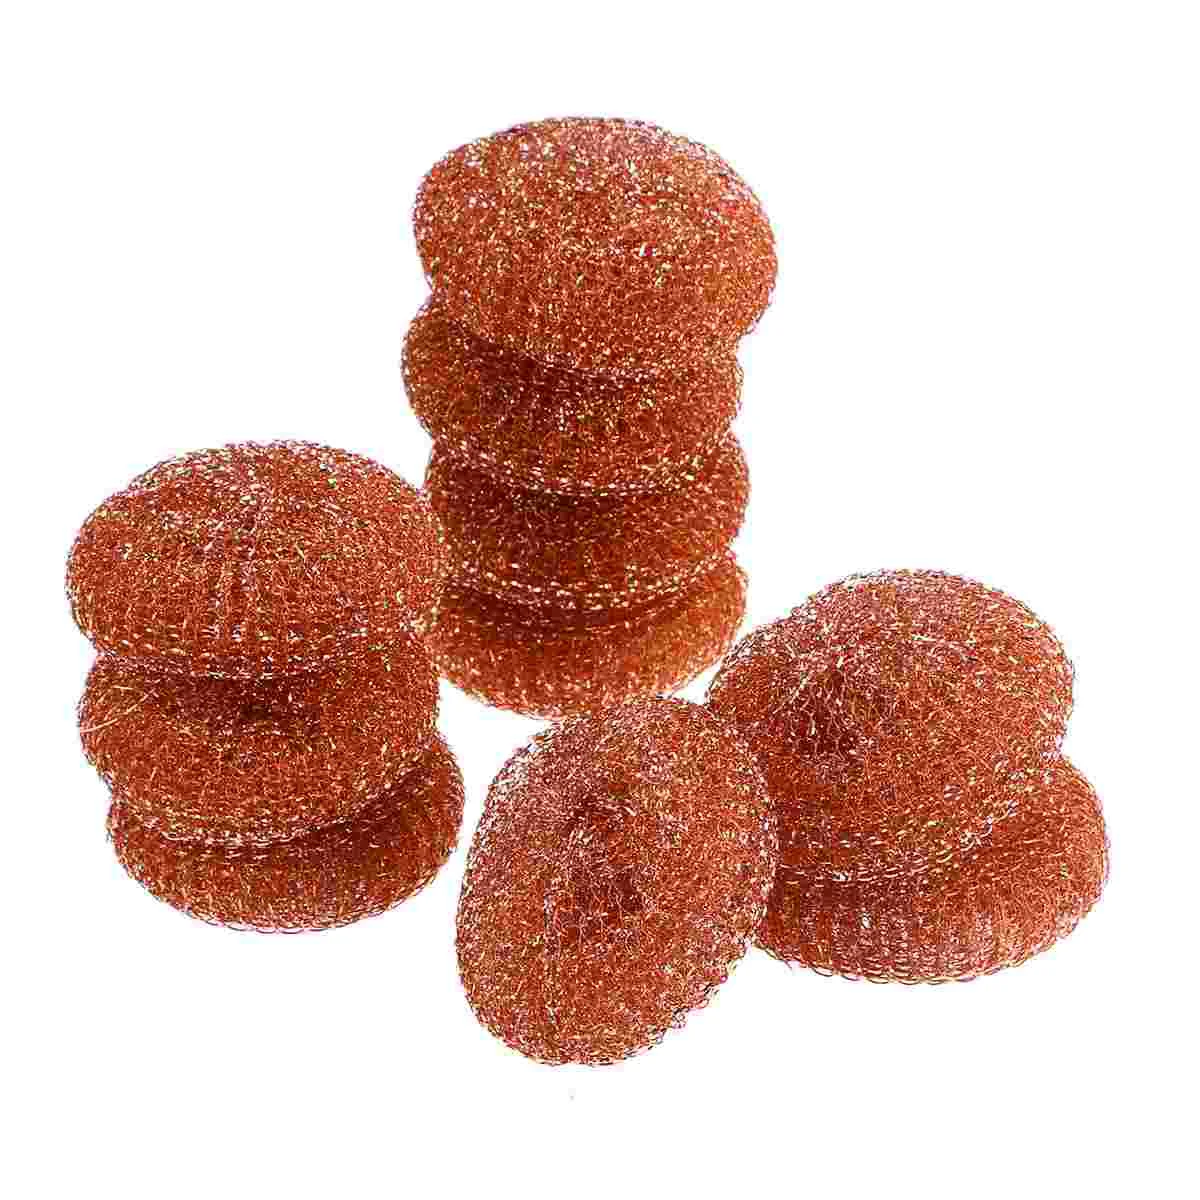 

Copper Wirecleaner Cleaning Scrubber Soldering Tip Pads Dish Pad Scourer Solder Clean Brush Mesh Pot Scrub Scrubbers Scouring